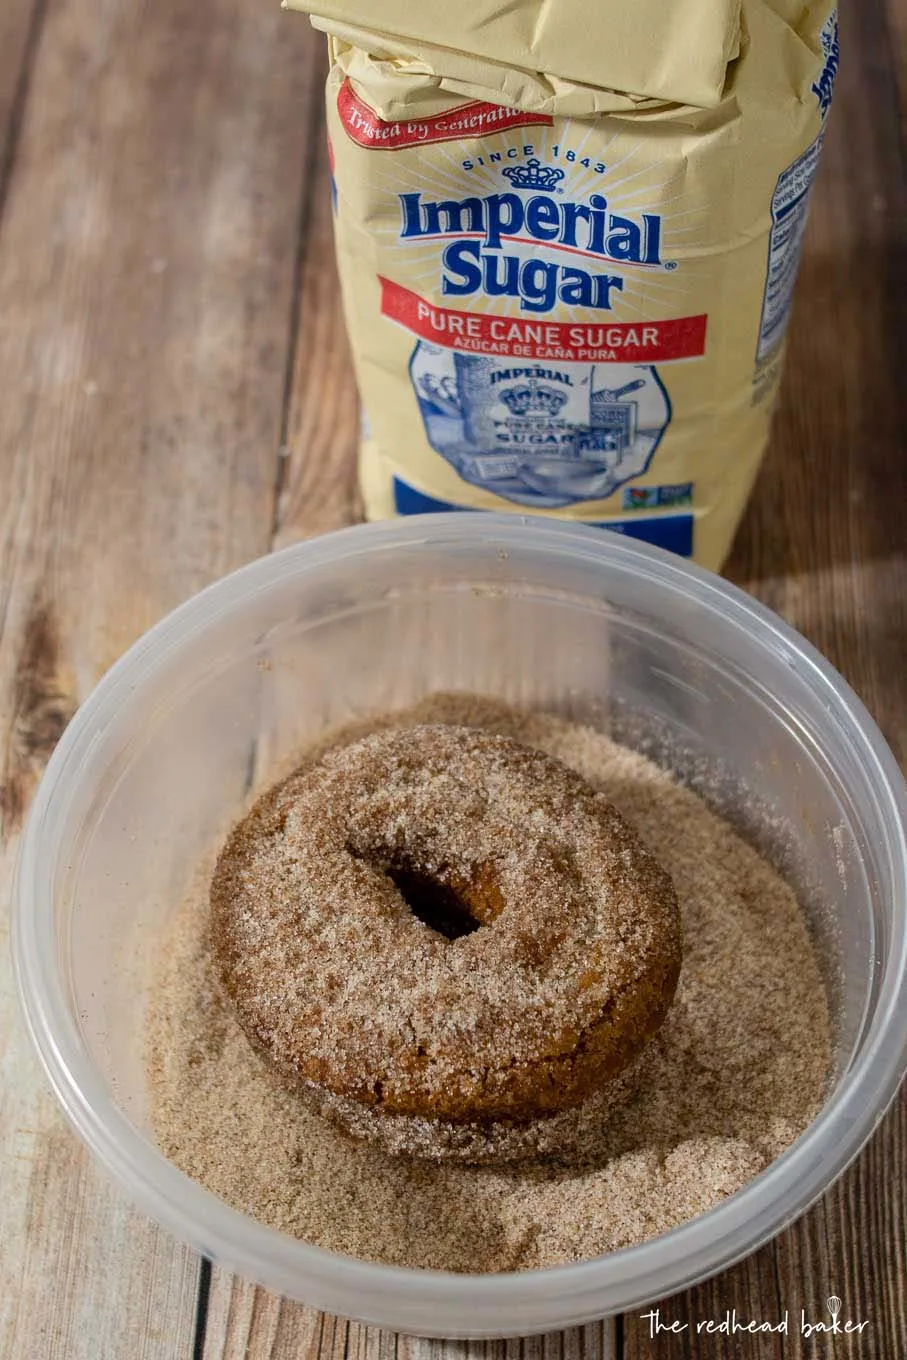 An apple cider doughnut in a dish of cinnamon sugar in front of a bag of Imperial Sugar.